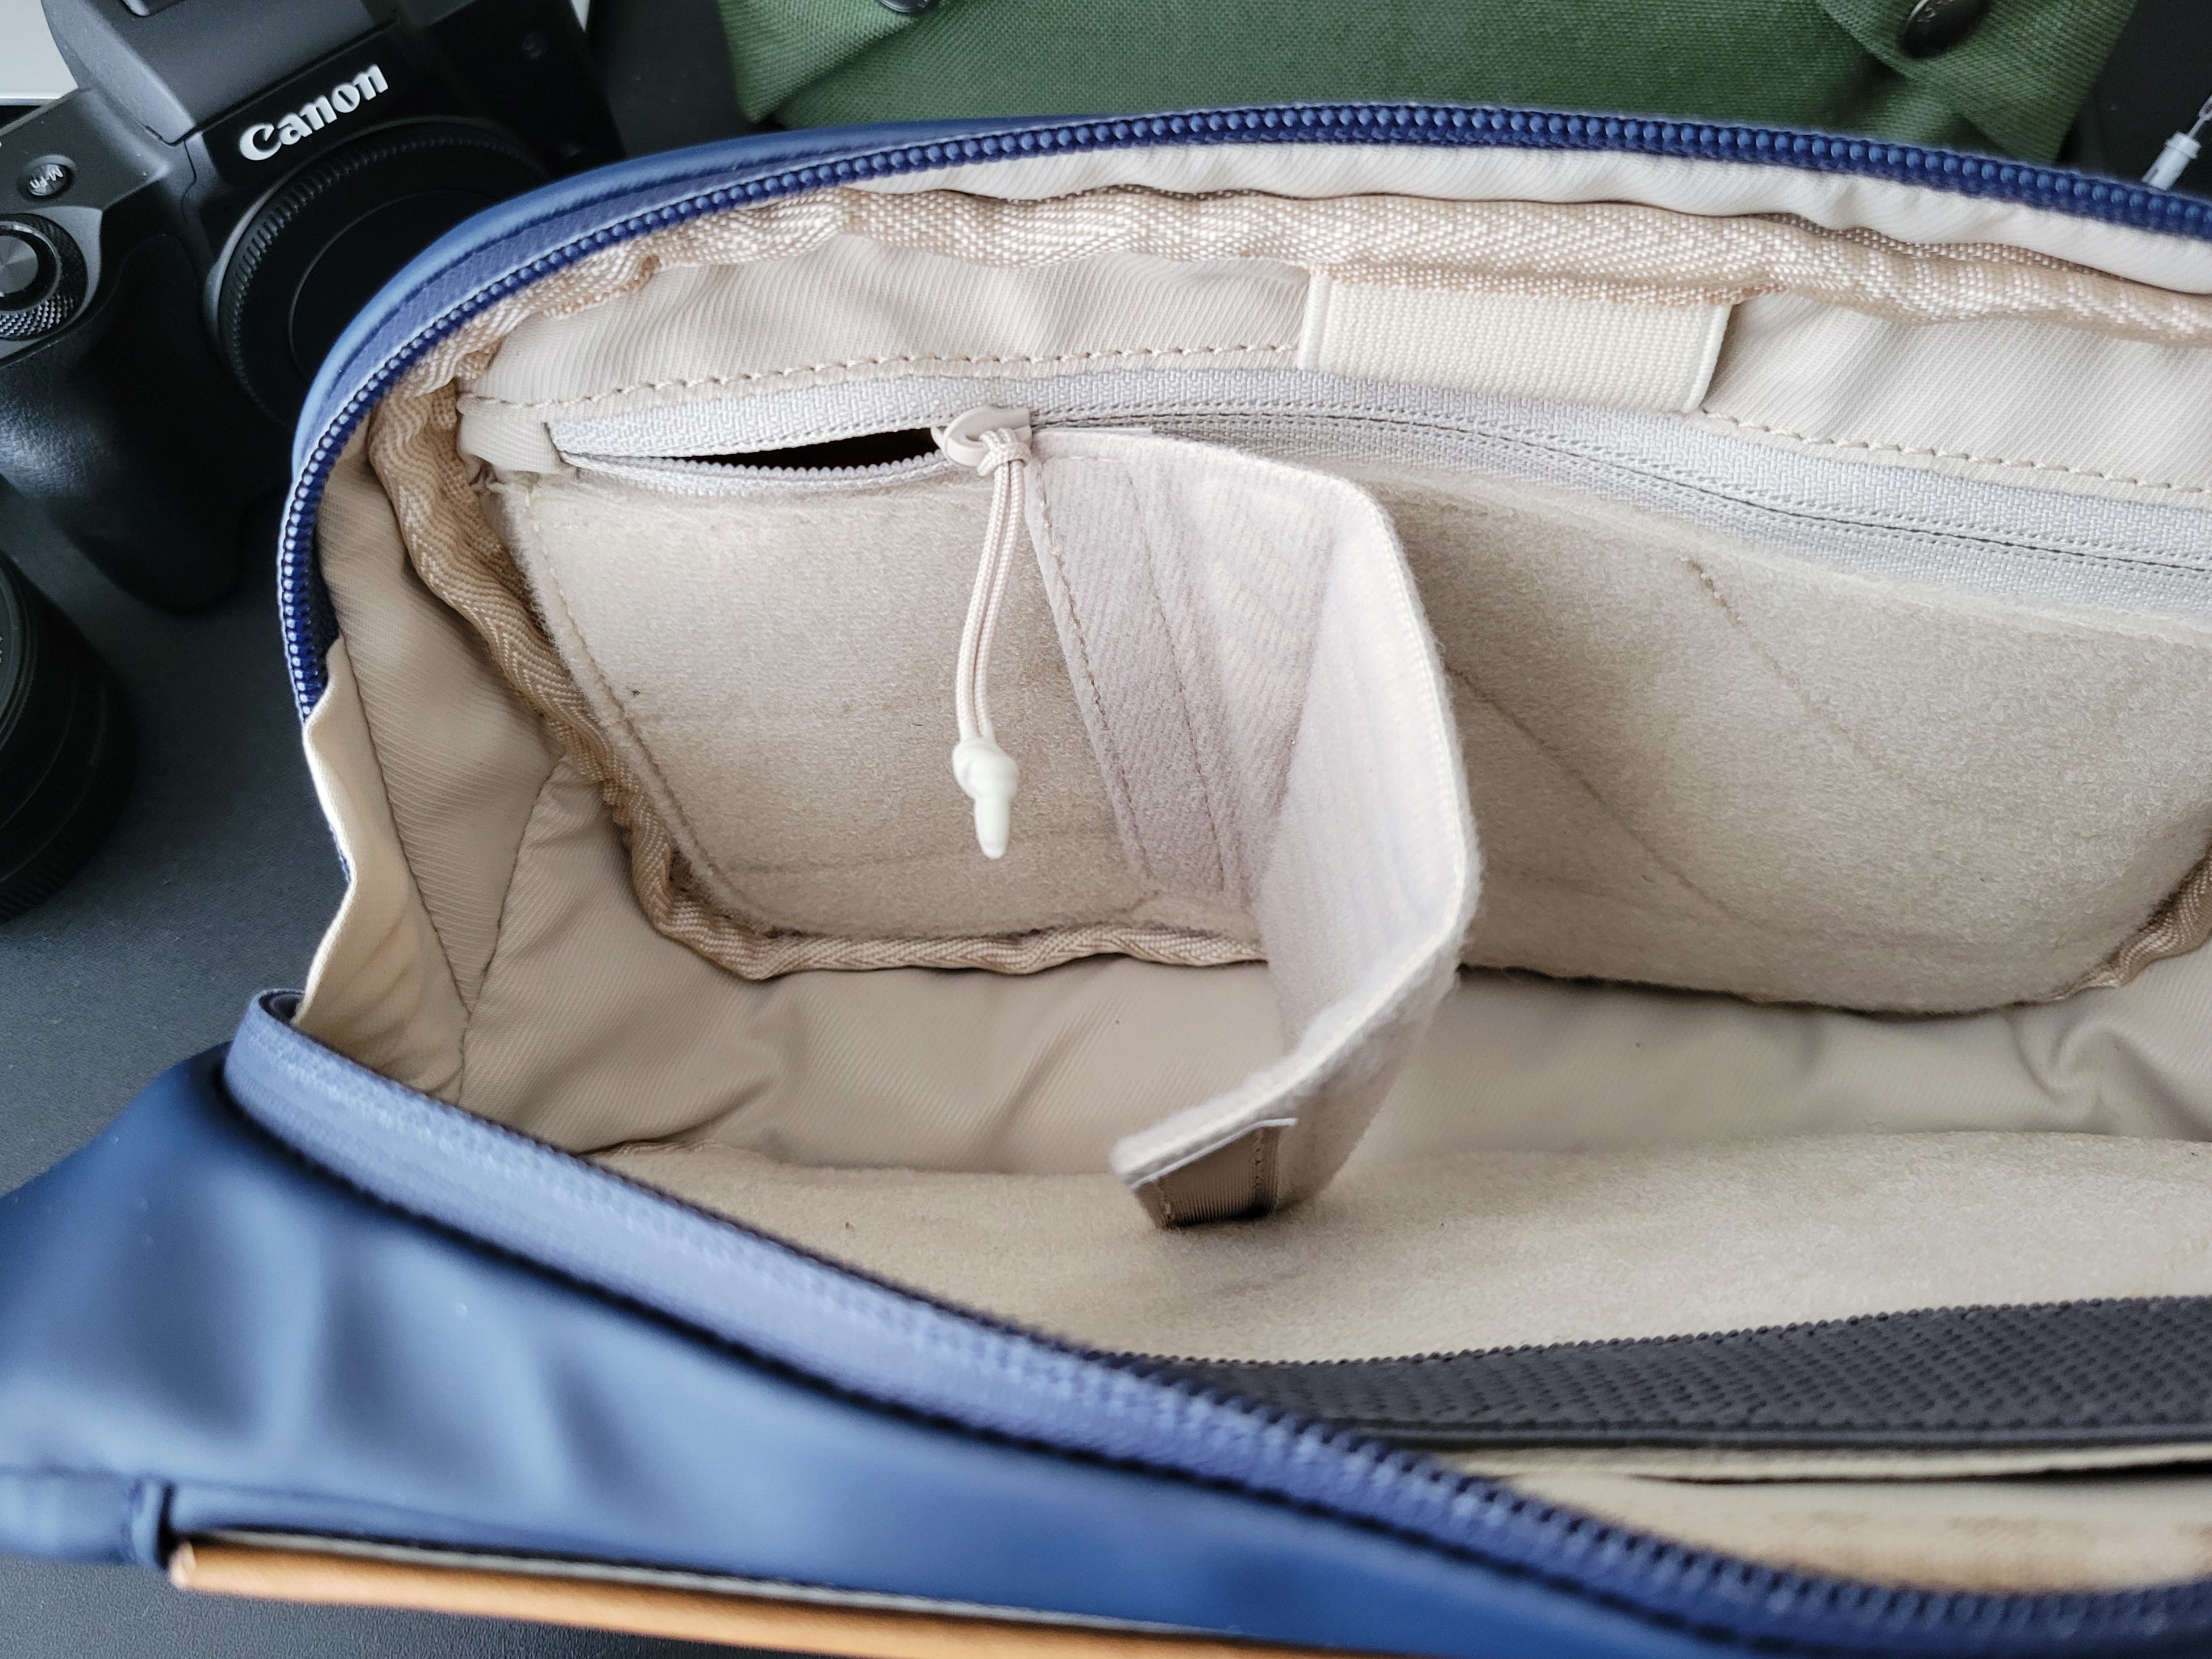 PGYTECH OneGo Solo review: A great solo or companion camera bag